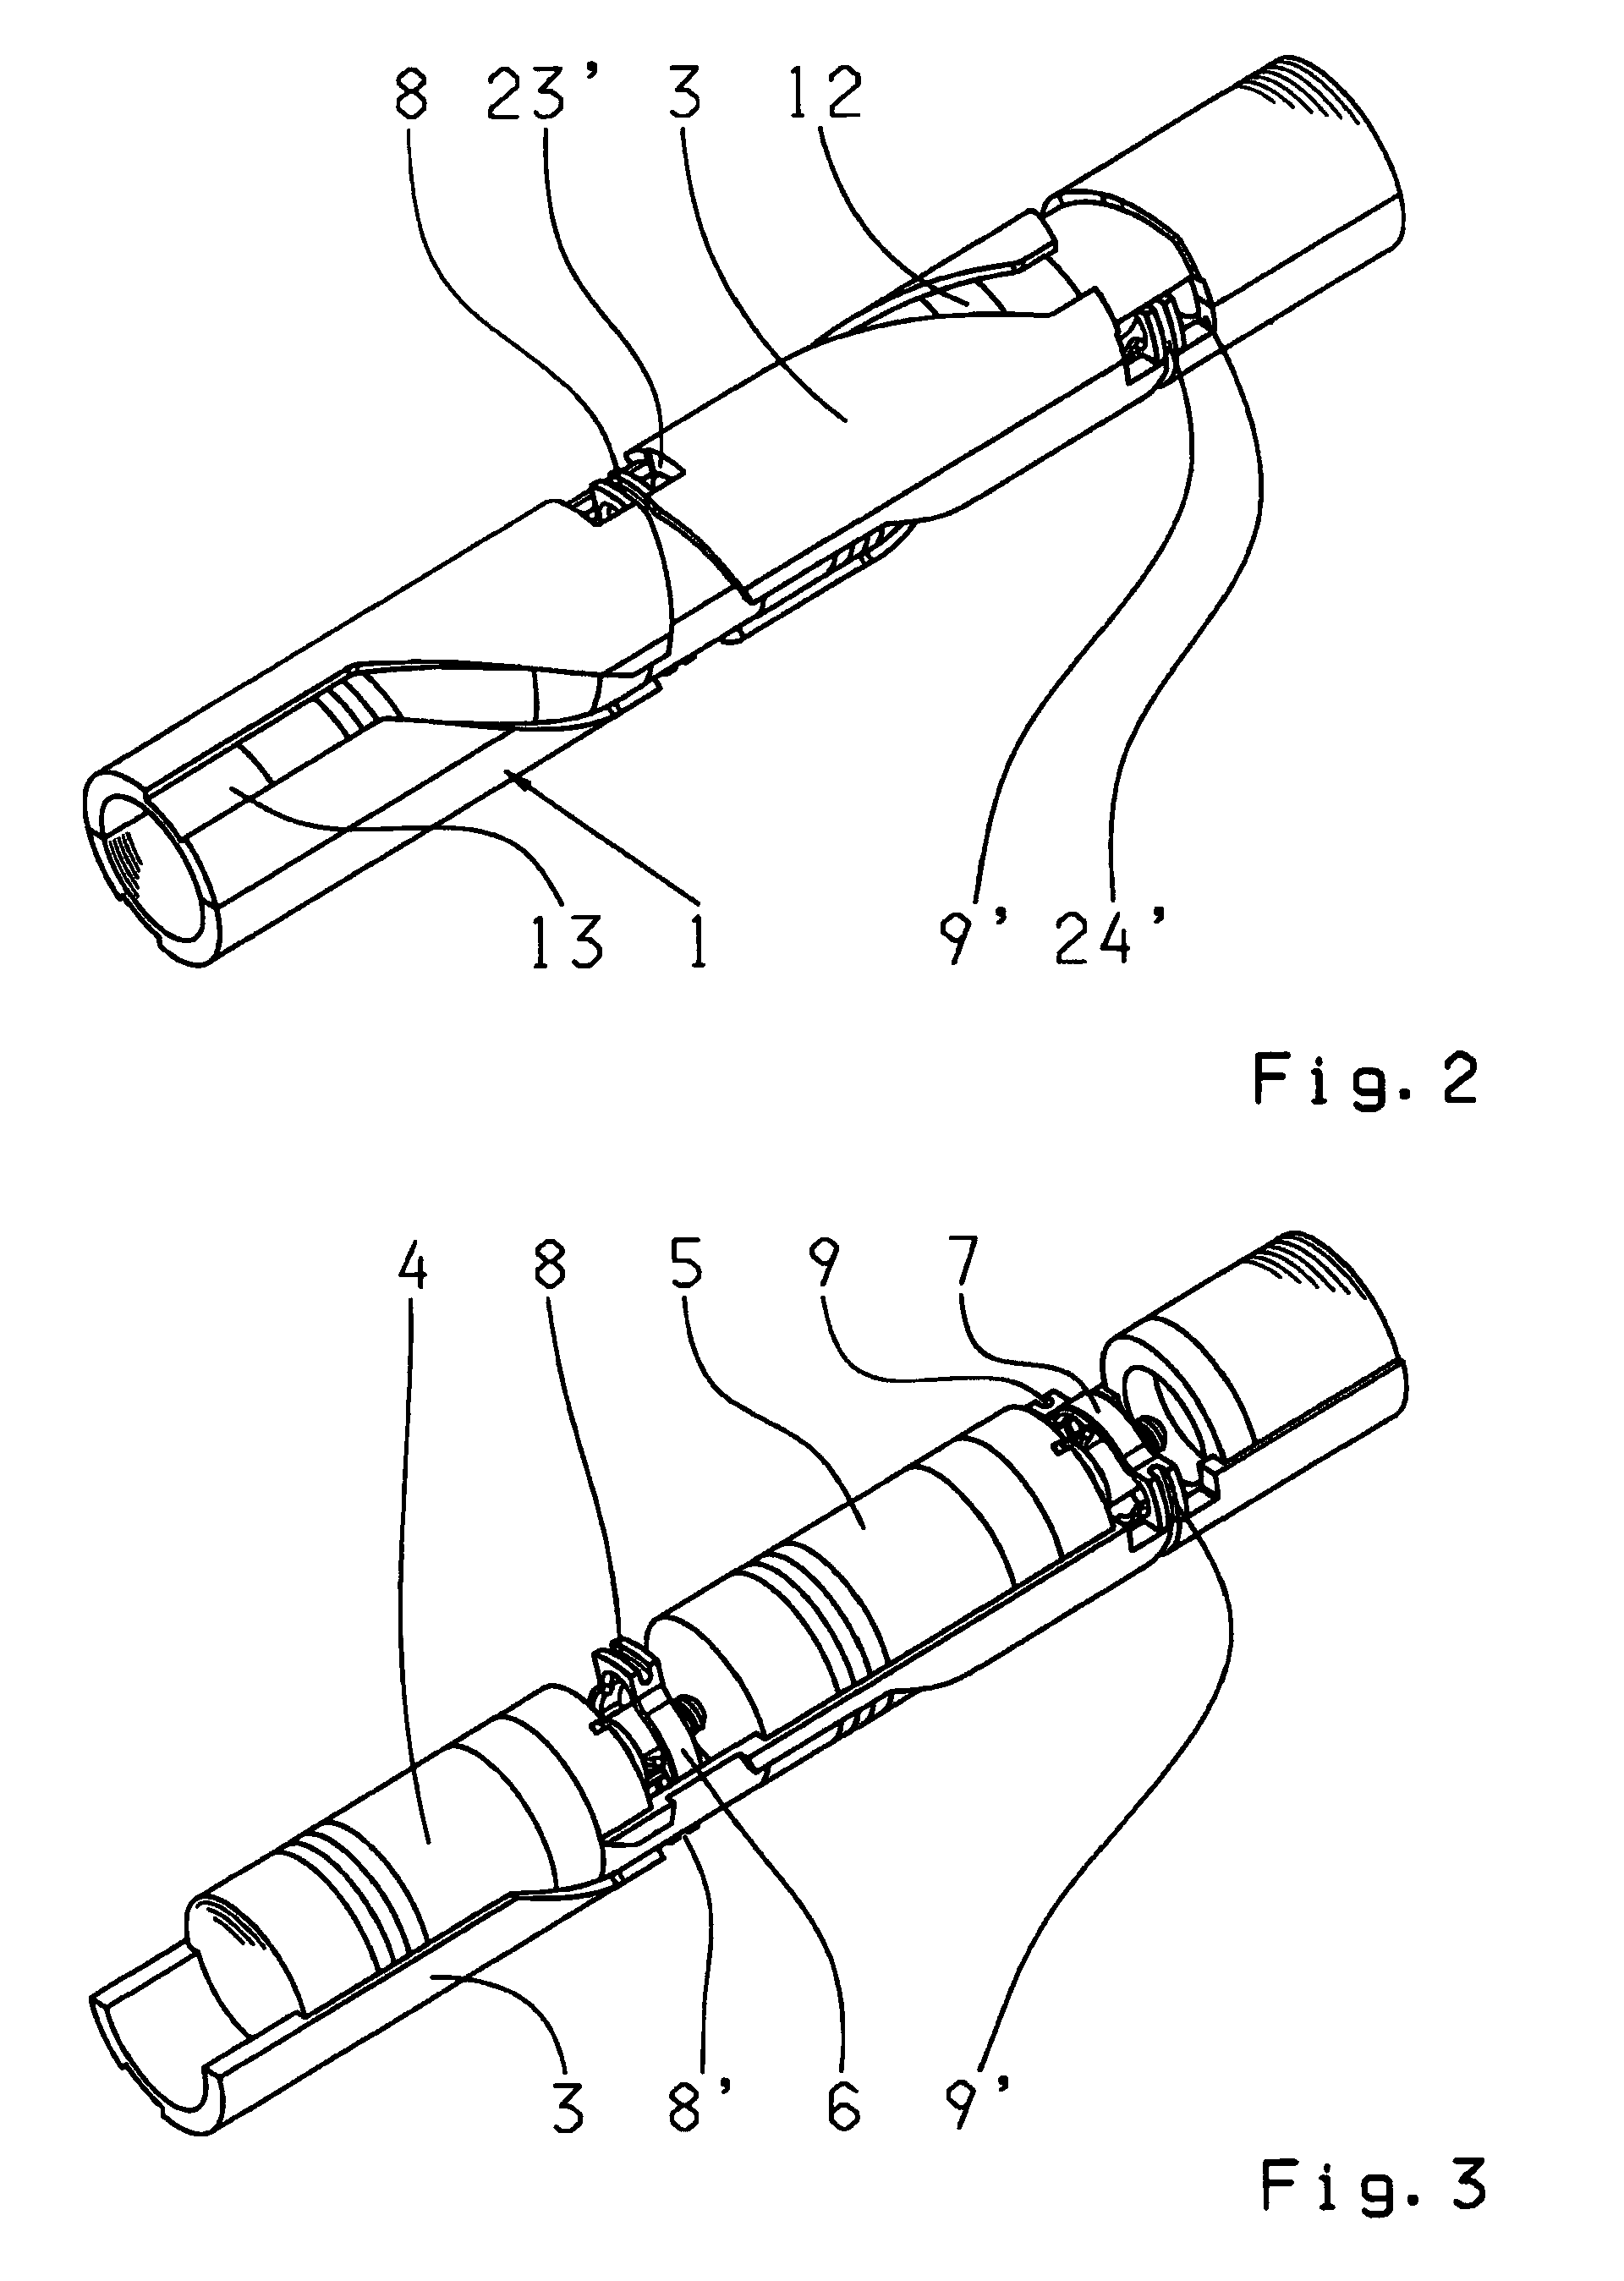 Actuating apparatus for actuating at least one shift apparatus and method for the assembly and disassembly thereof